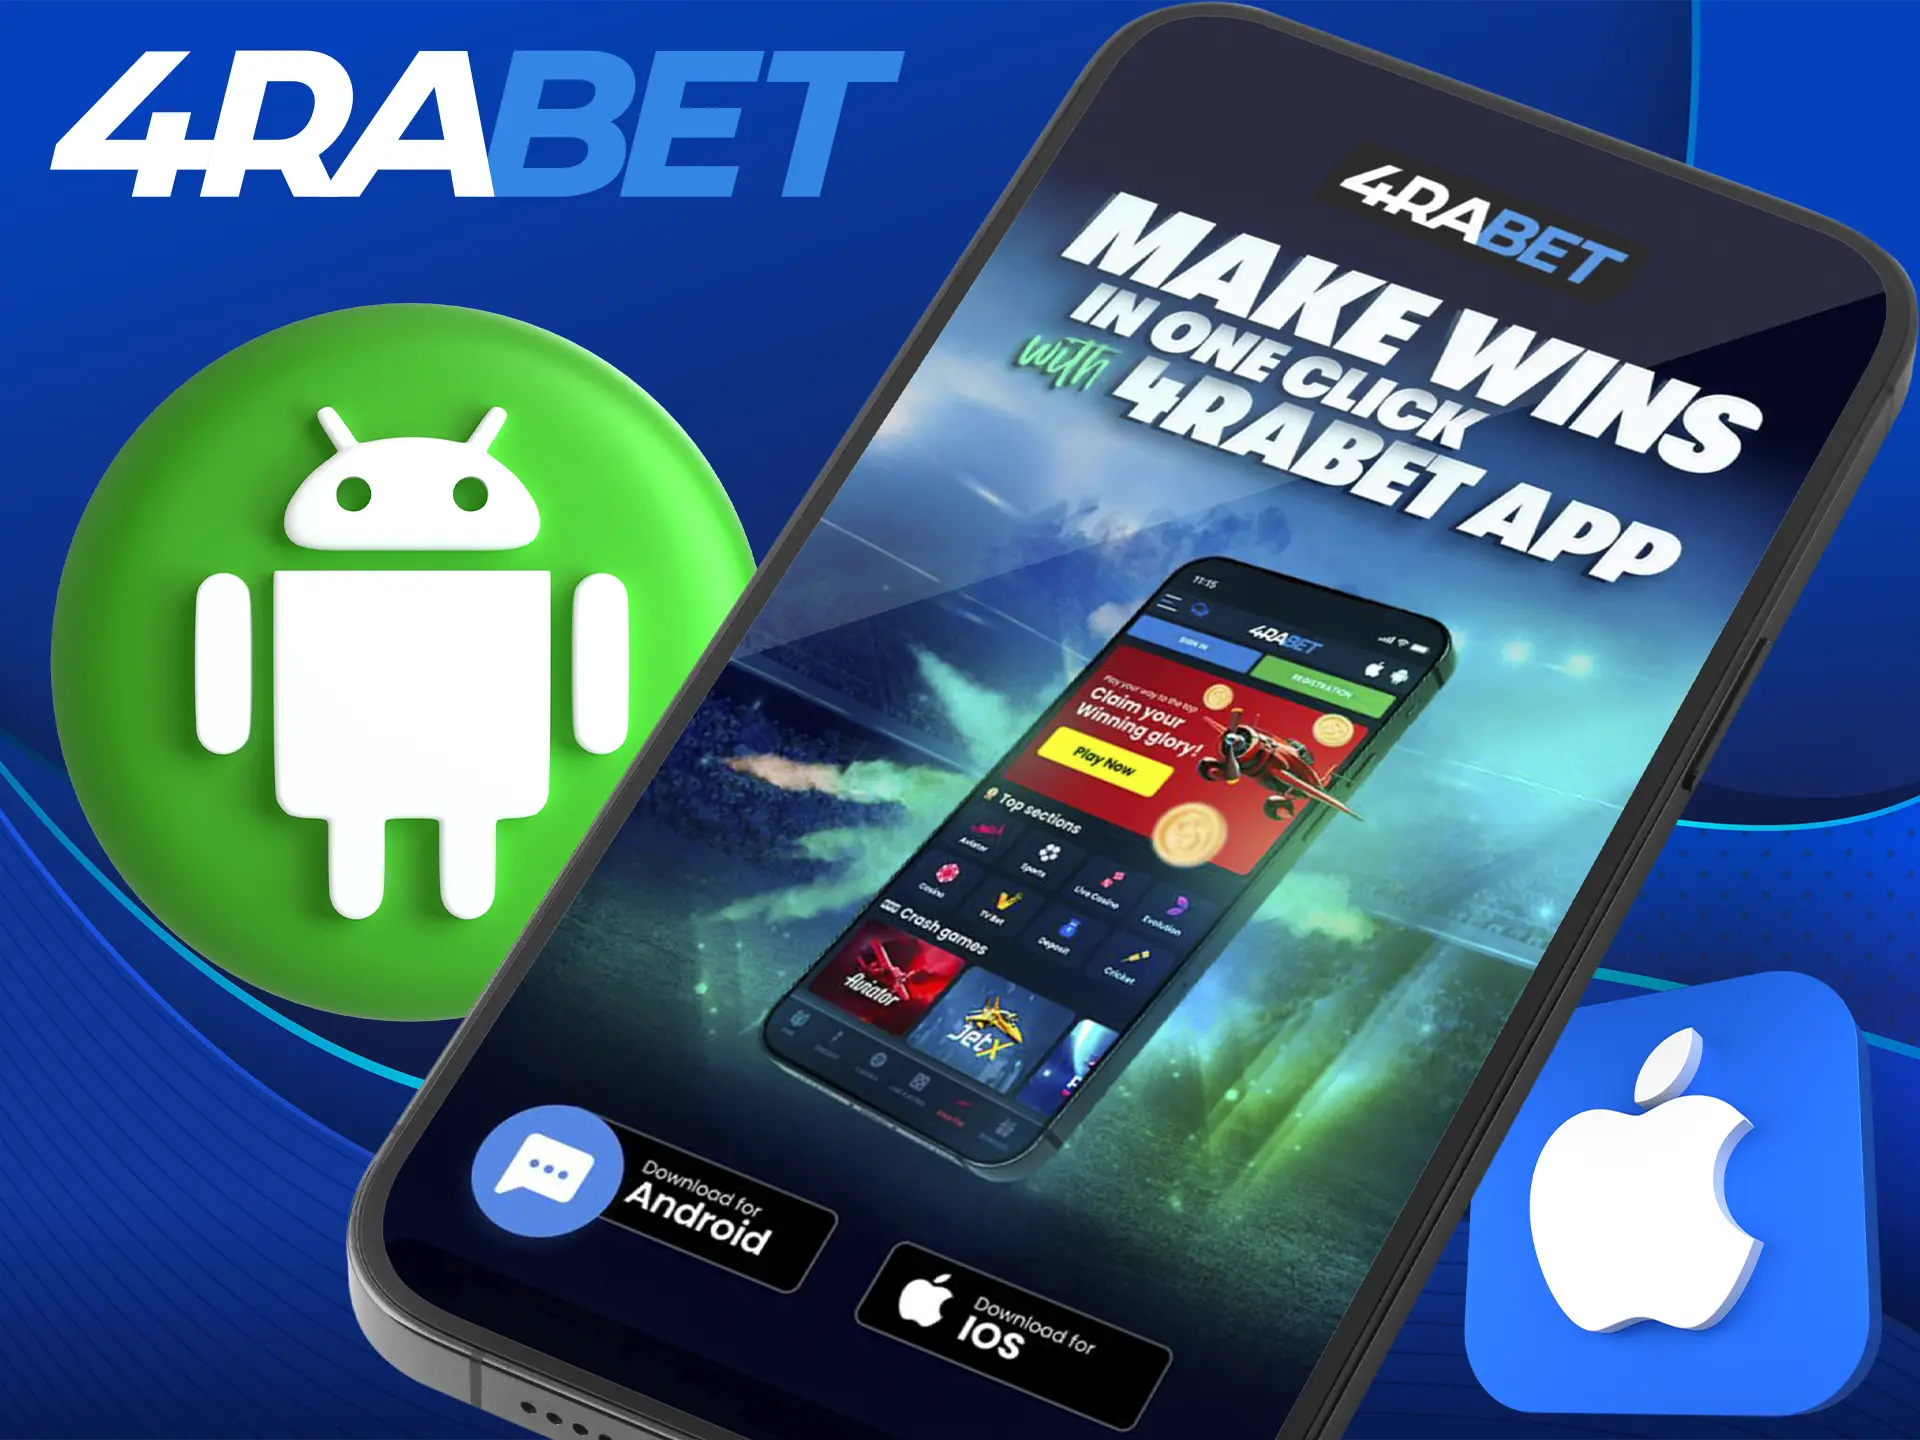 Download the 4rabet app to have quick access to cricket betting.